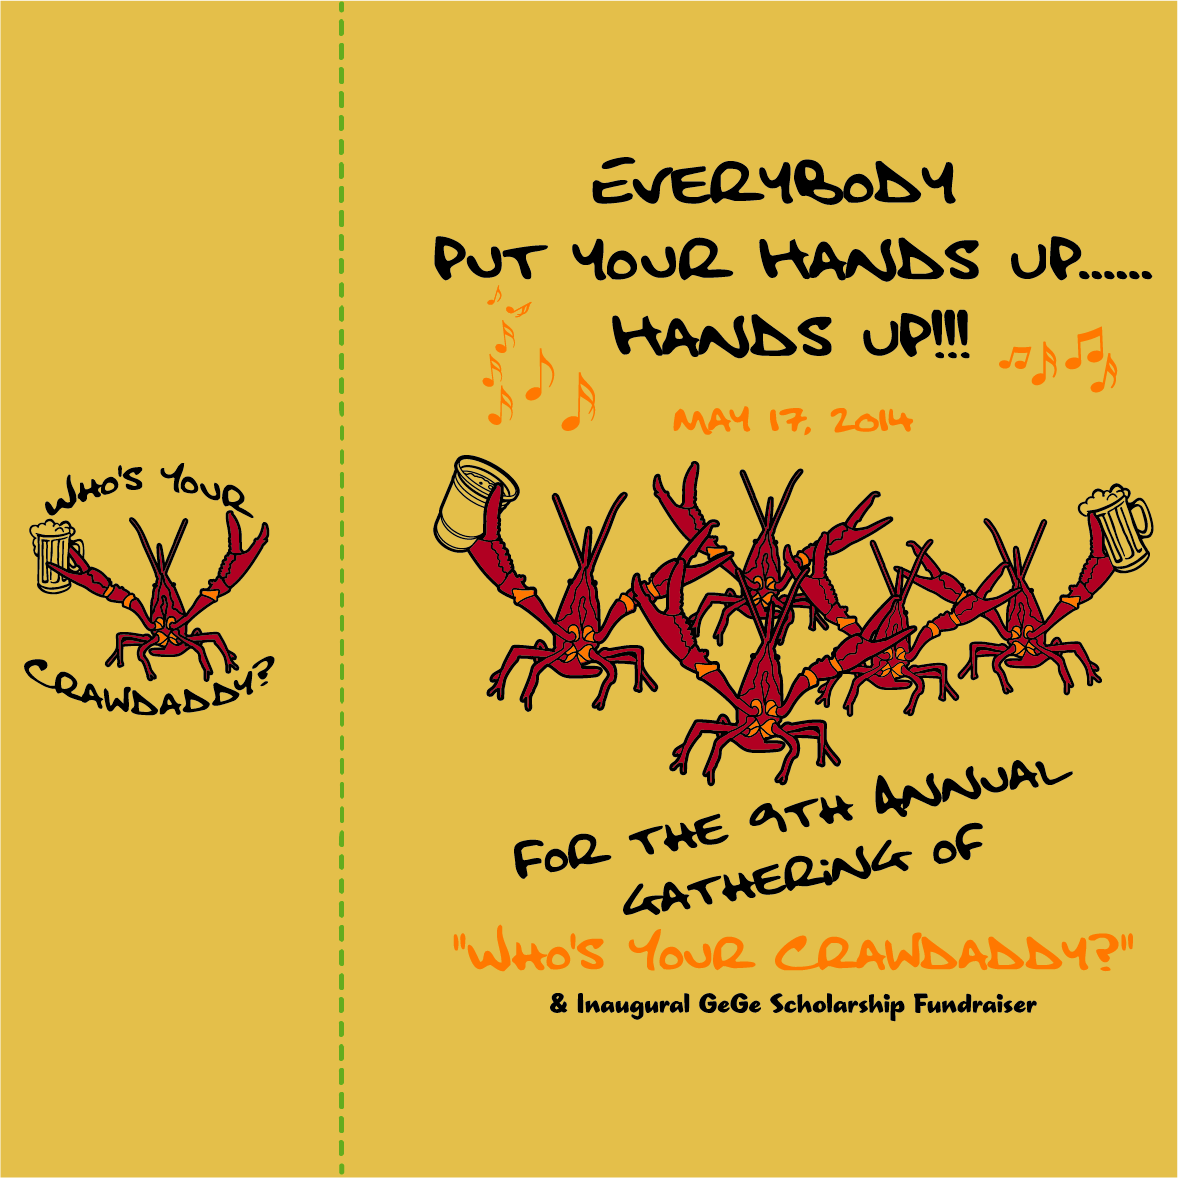 Who's Your Crawdaddy? shirt design - zoomed